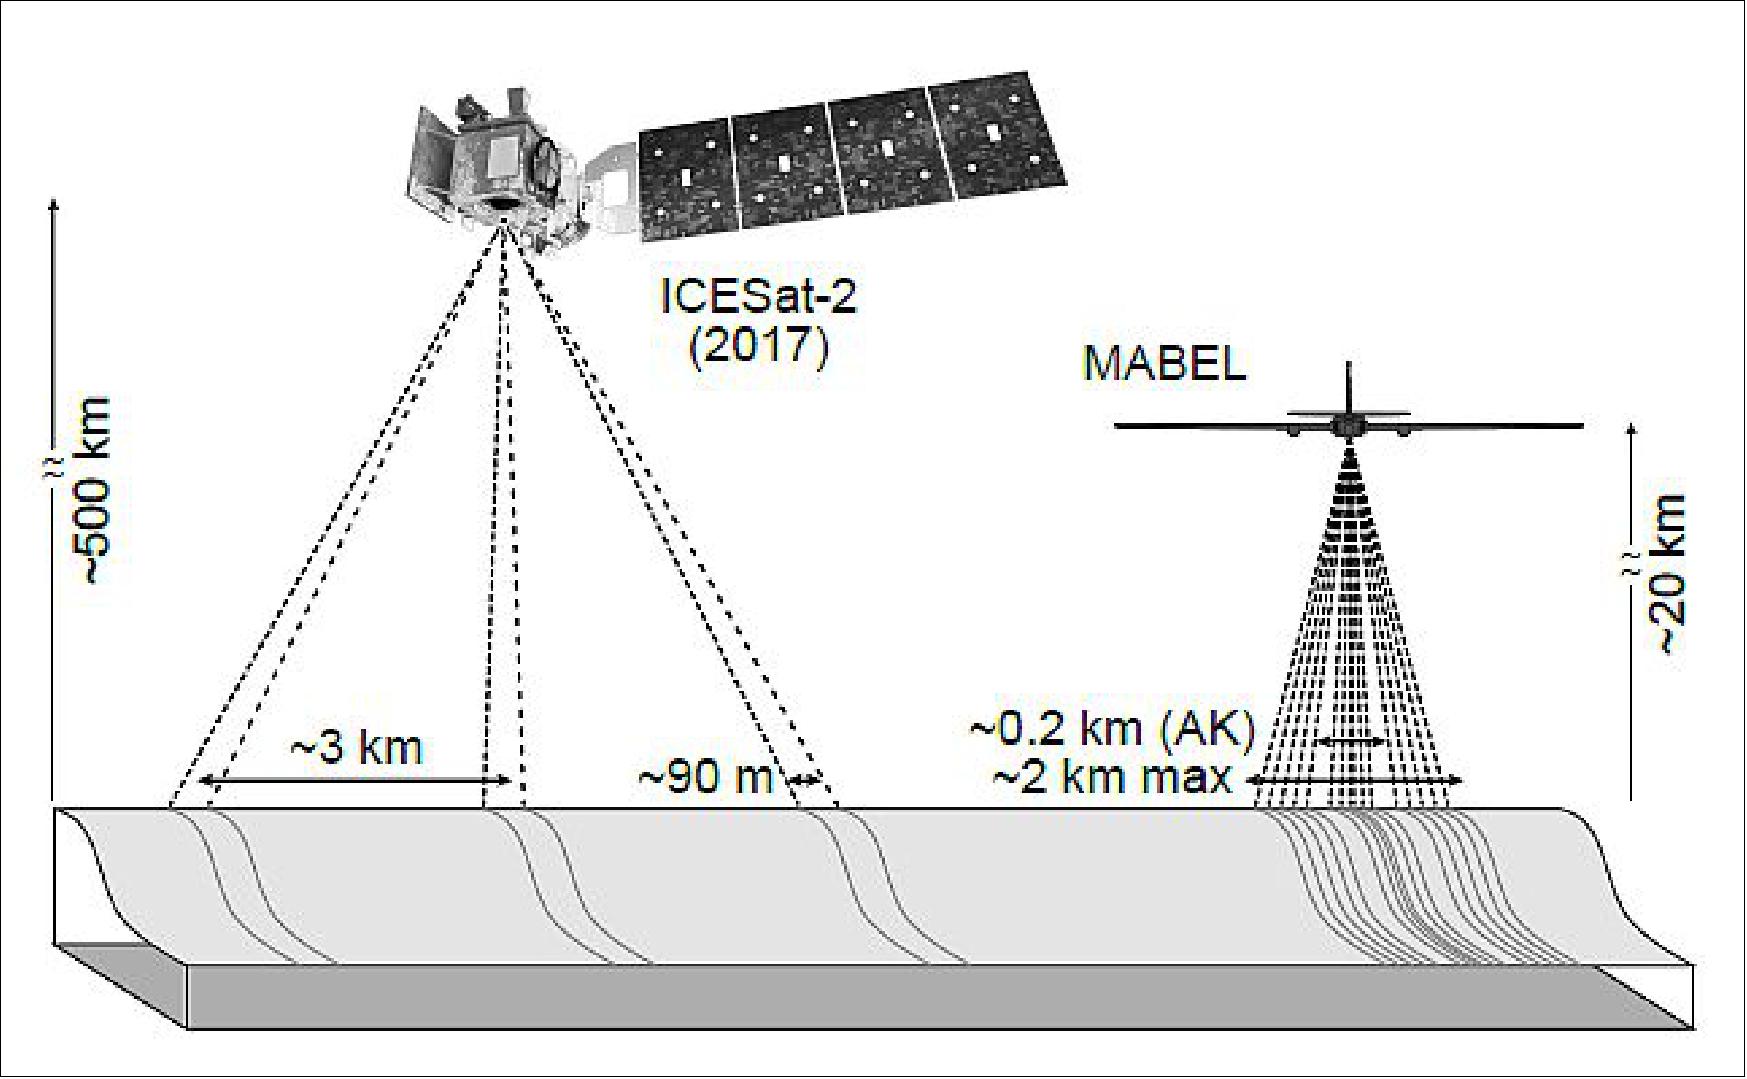 Figure 73: Schematic ICESat-2 and MABEL beam geometry (dashed lines) and reference ground tracks (grey lines along icesheet surface). ICESat-2 beam pairs (separated by ~90 m) do not have the same energy in order to keep the required laser energy low; therefore, each beam pair consists of a strong and a weak beam (as indicated by the dash difference). MABEL allows for beamgeometry changes with a maximum ground spacing of ~2 km at 20 km. However, for the 2014 AK deployment, the maximum ground spacing was 0.2 km (Ref. 86), image credit: MABEL Team